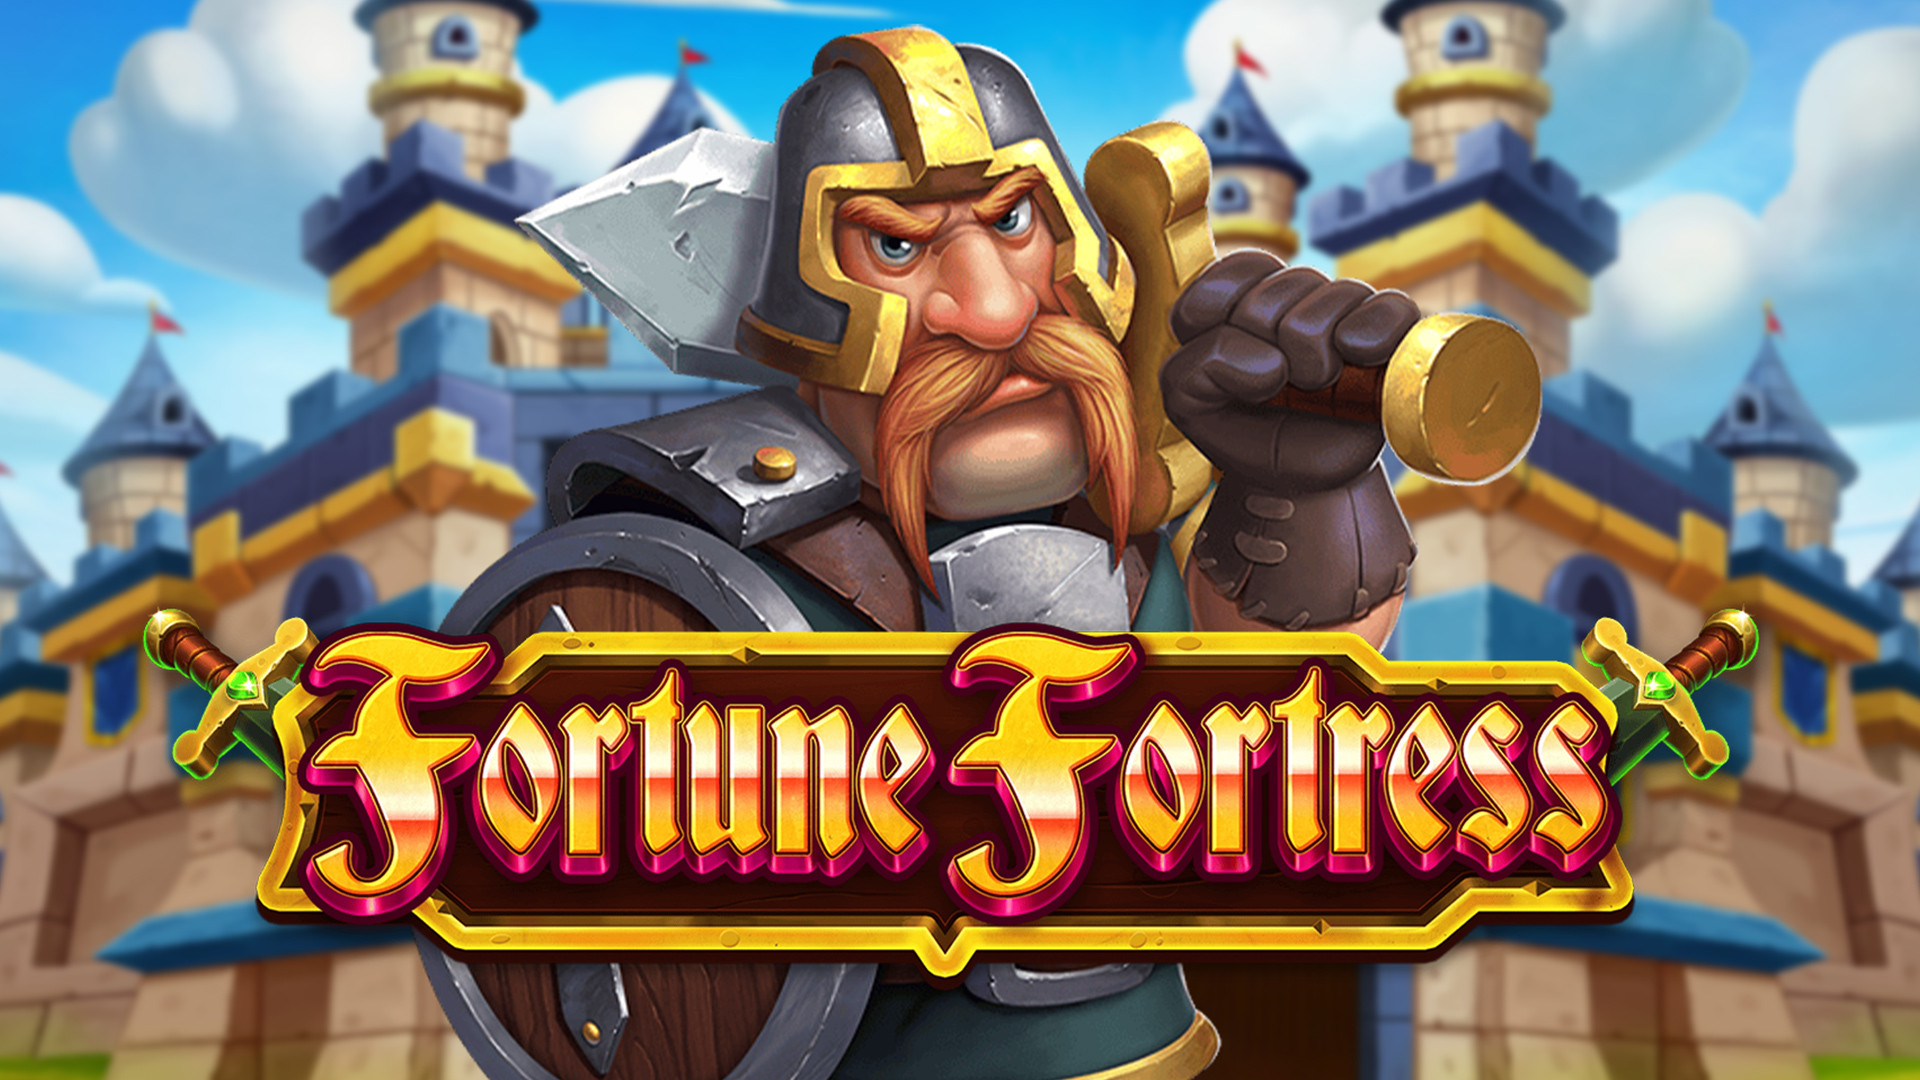 Fortune Fortress